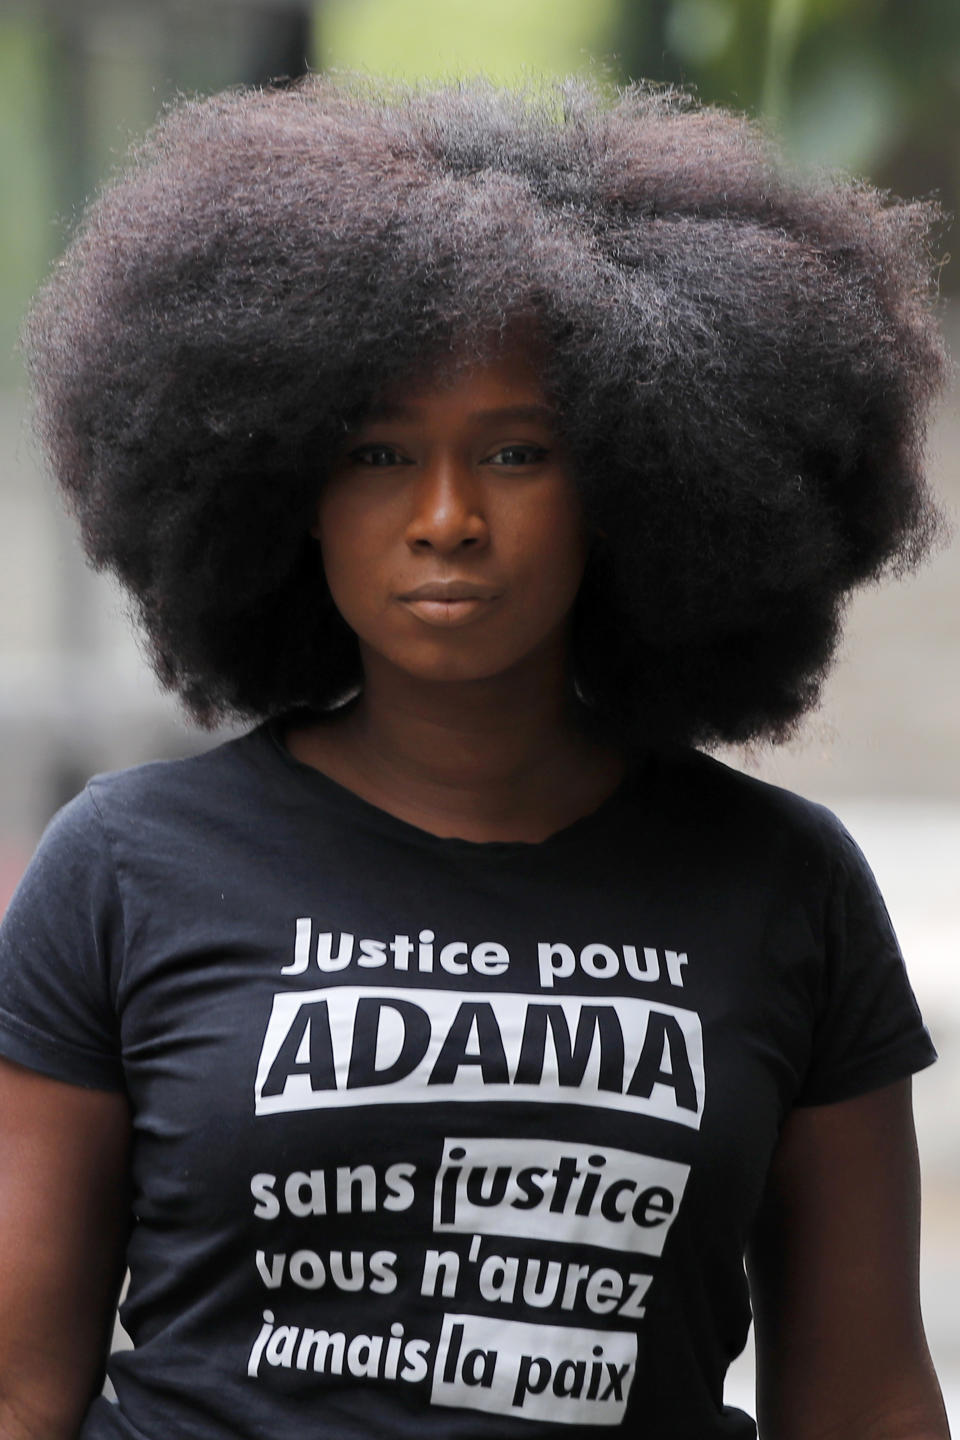 Assa Traore, wearing a shirt that reads: “Justice for Adama, without Justice you will never be in Peace,” attends an interview in Ivry-sur-Seine, on the outskirts of Paris, Wednesday, July 15, 2020. Traore started by fighting for justice for her brother Adama, who died in police custody on his 24th birthday four years ago. She’s now at the forefront of a new movement for Black rights in France that aims to wipe out systemic racism in policing and challenge the country’s official vision of itself as a colorblind society. (AP Photo/Francois Mori)